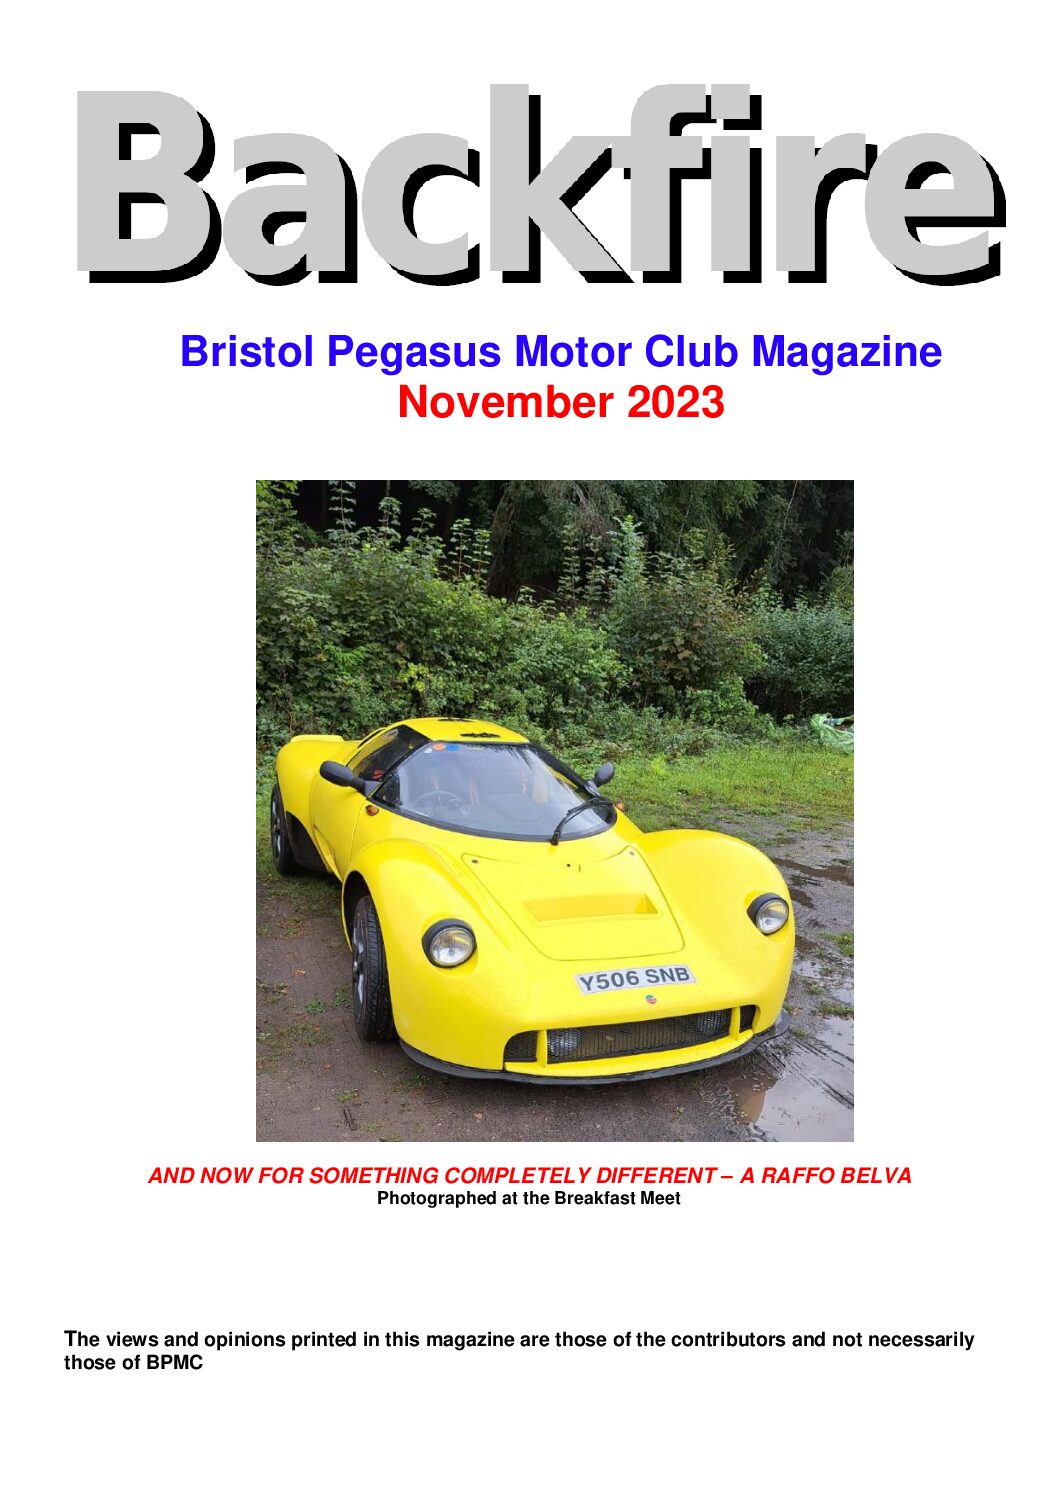 Front cover of November 2023 Issue